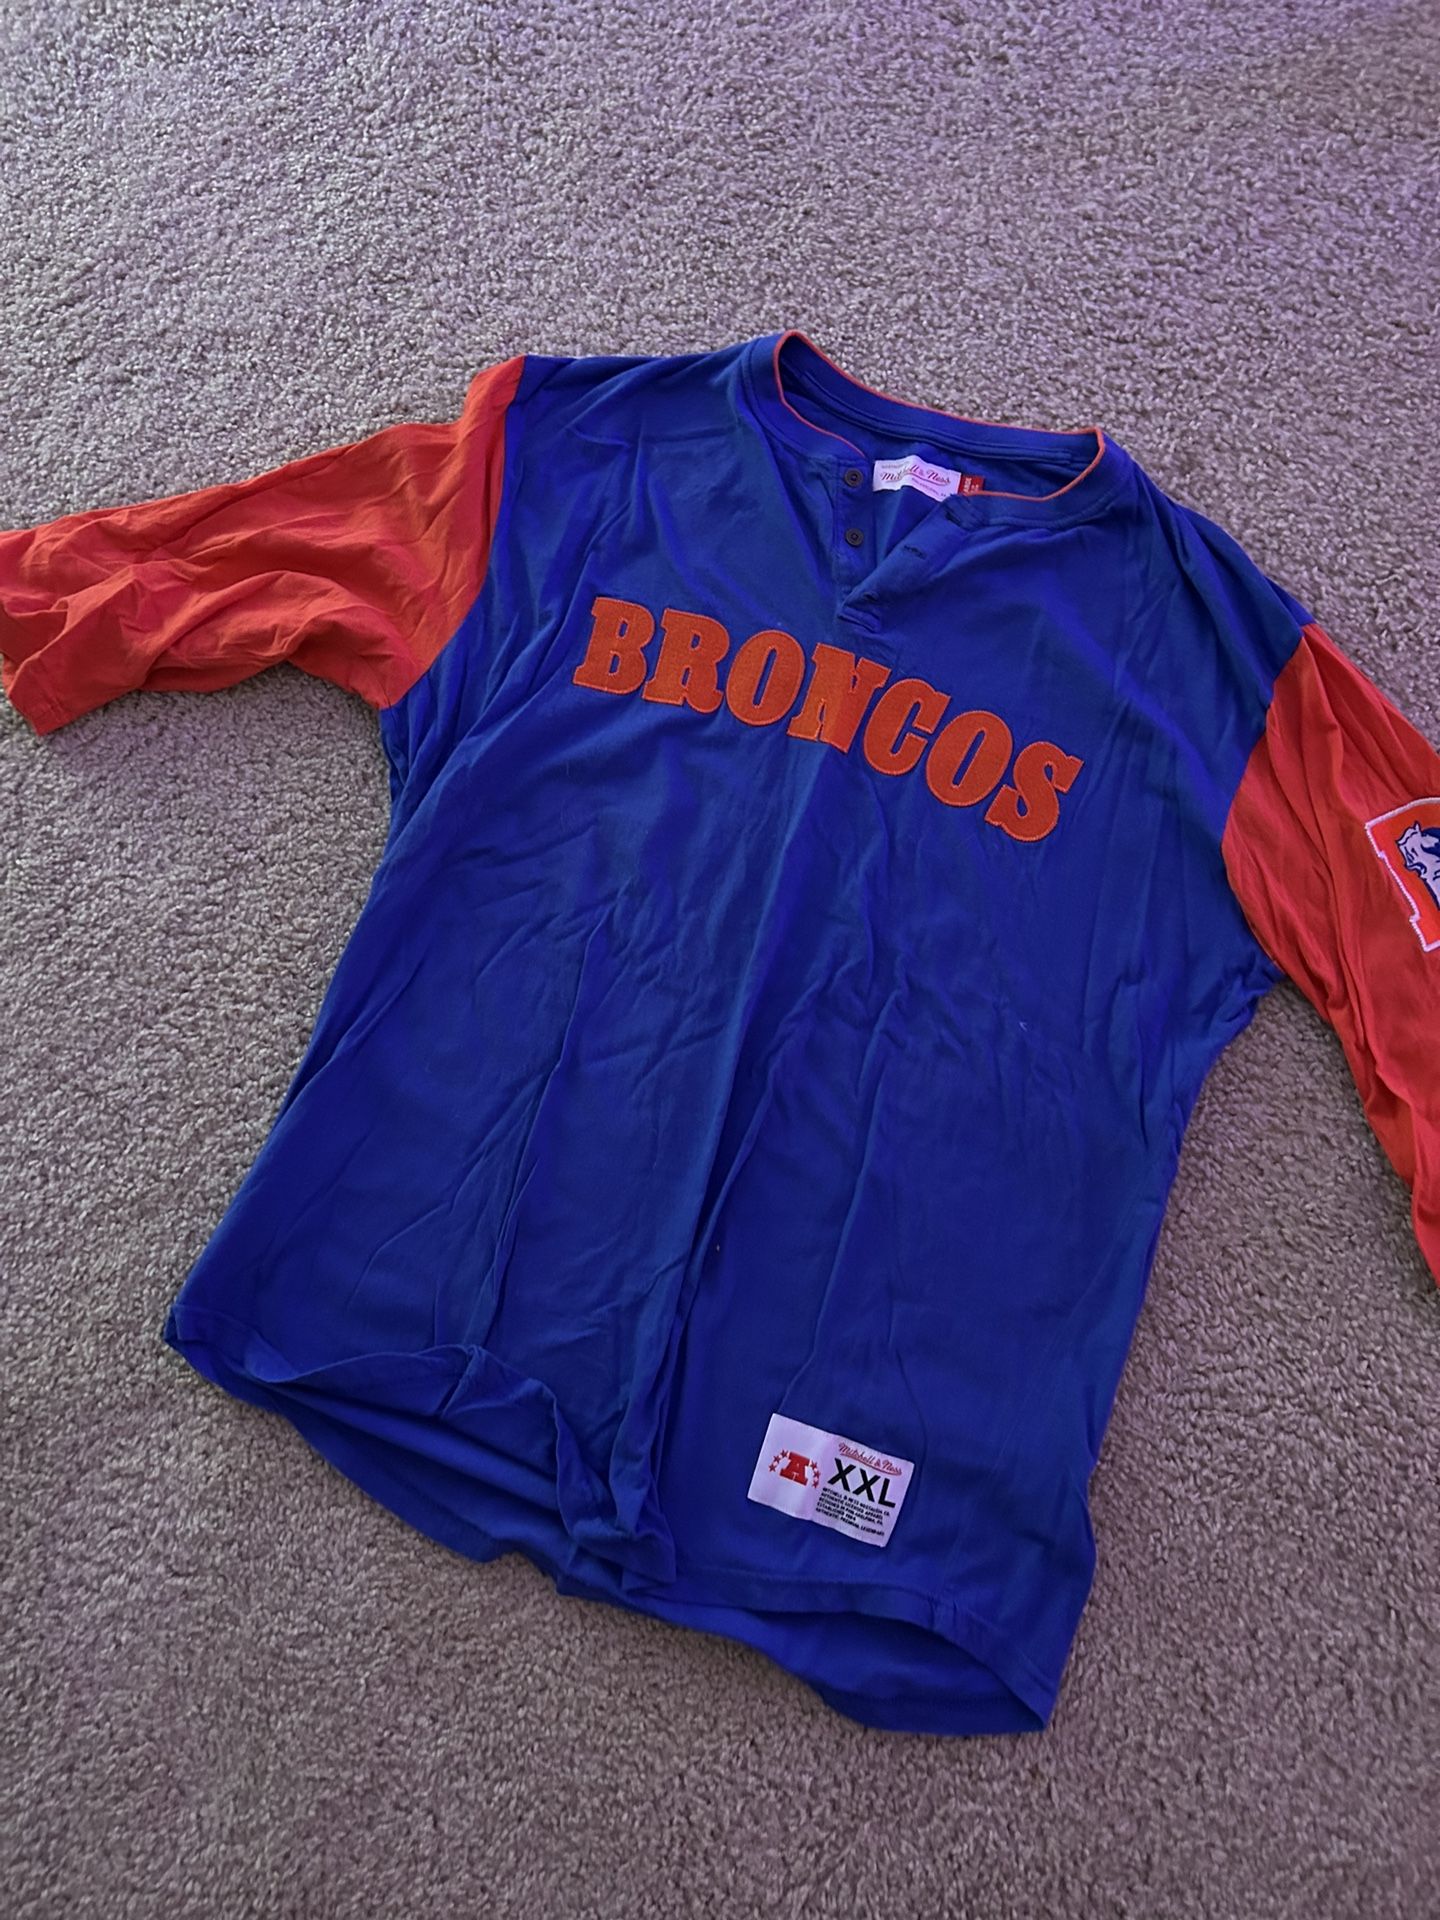 Broncos Jersey by Mitchell & Ness (XXL) for Sale in Bremerton, WA - OfferUp